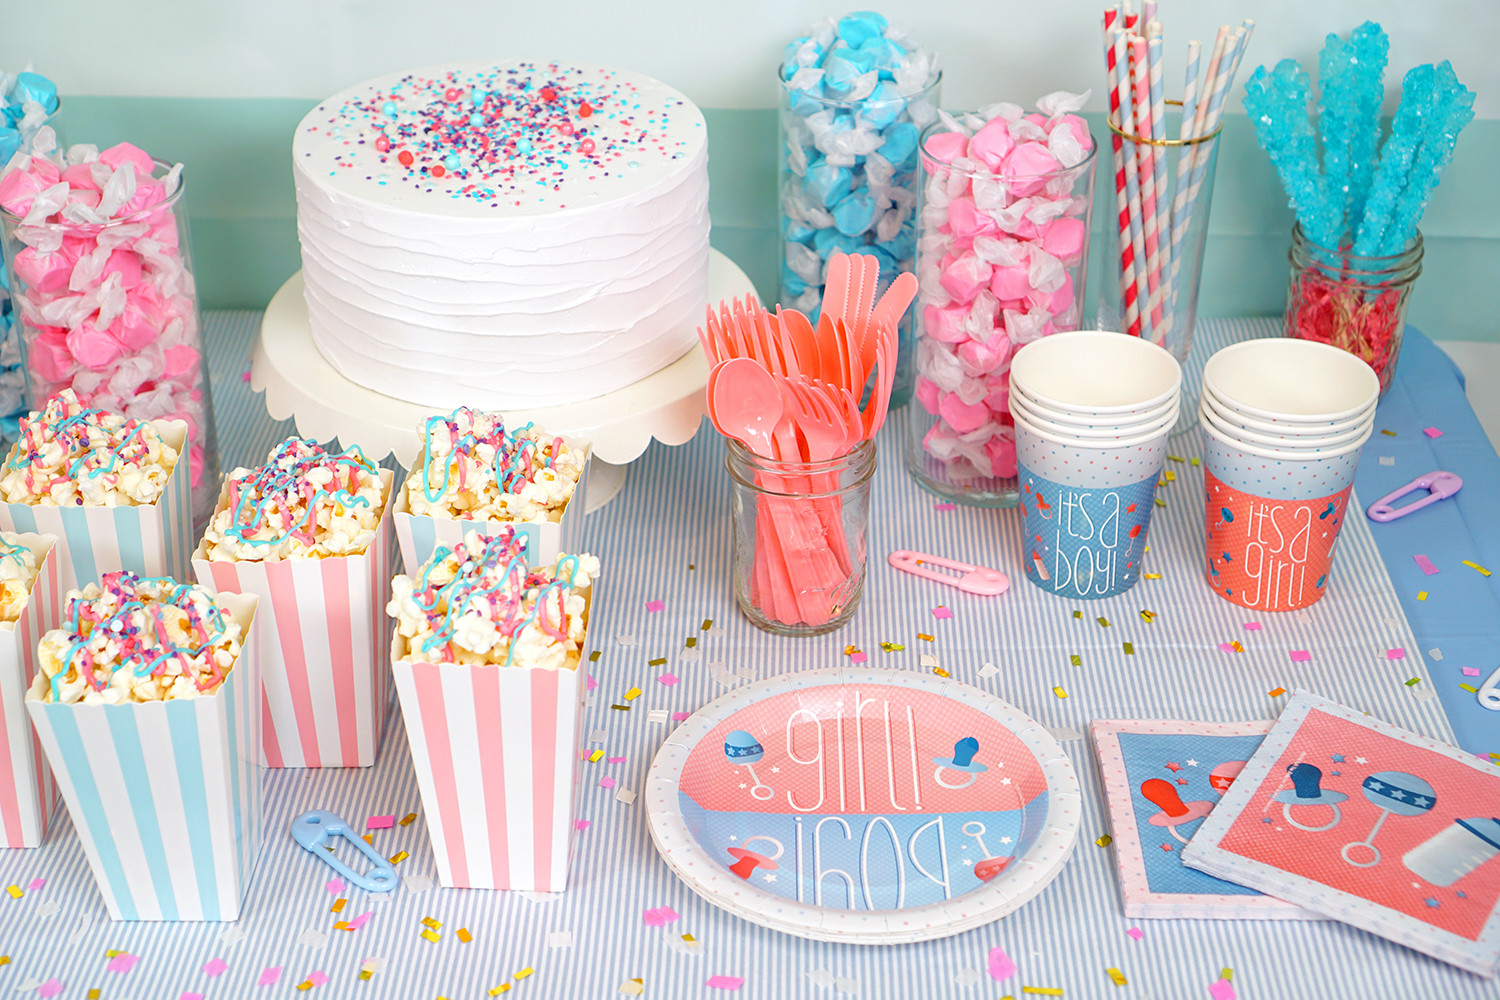 Party City Gender Reveal Ideas
 4th July Gender Reveal Party Ideas